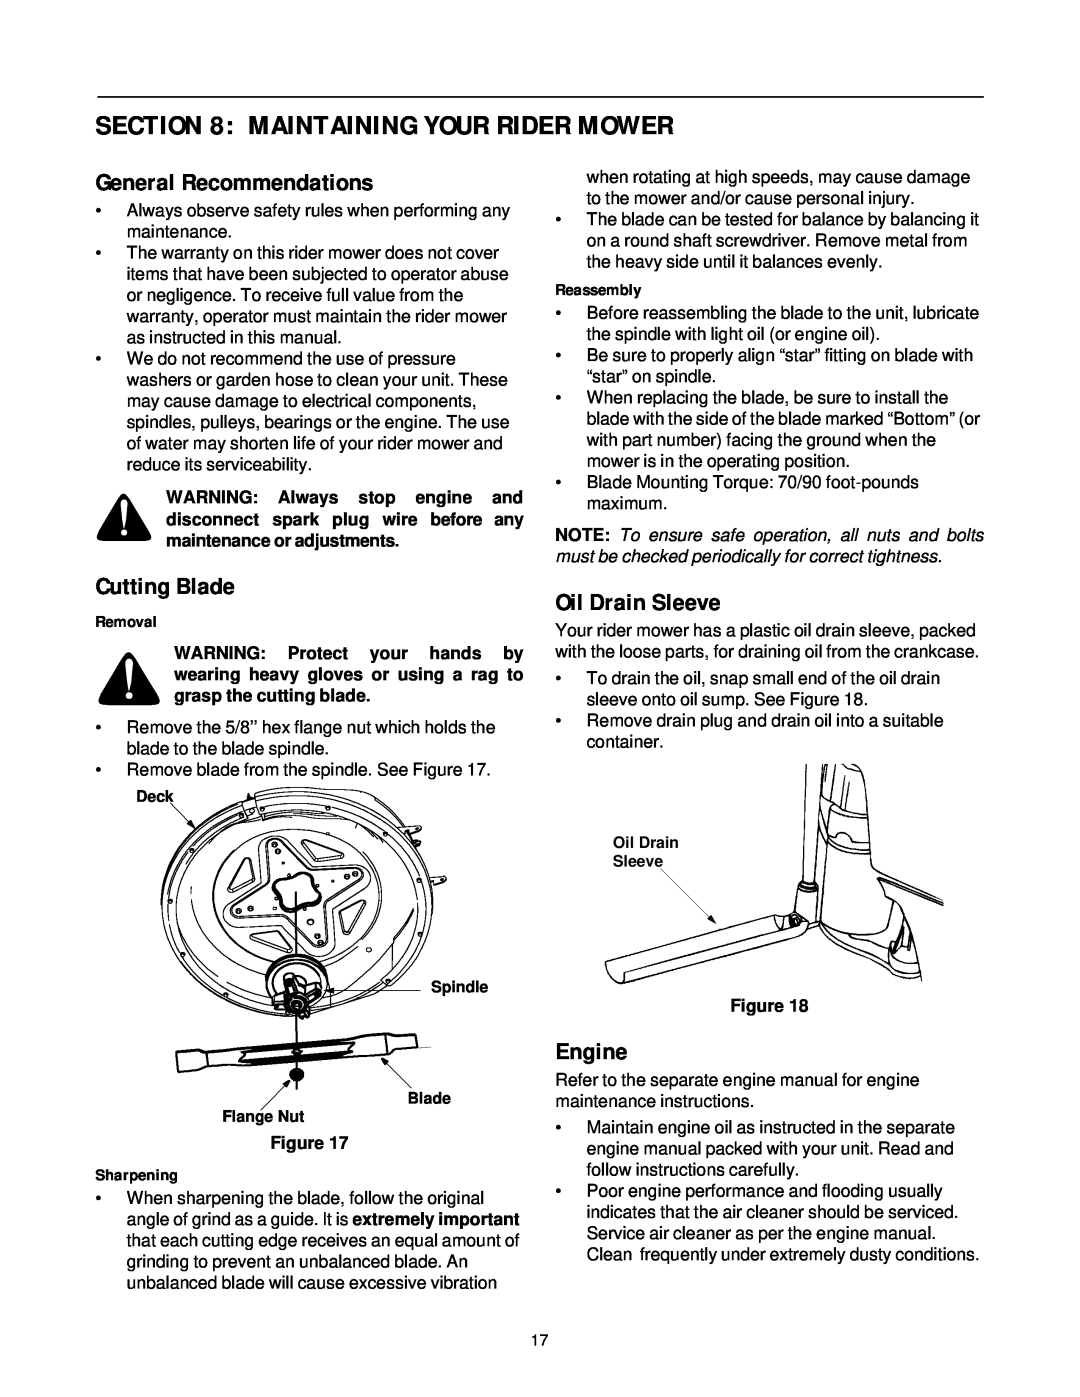 Yard-Man 13B-325-401 manual Maintaining Your Rider Mower, General Recommendations, Cutting Blade, Oil Drain Sleeve, Engine 